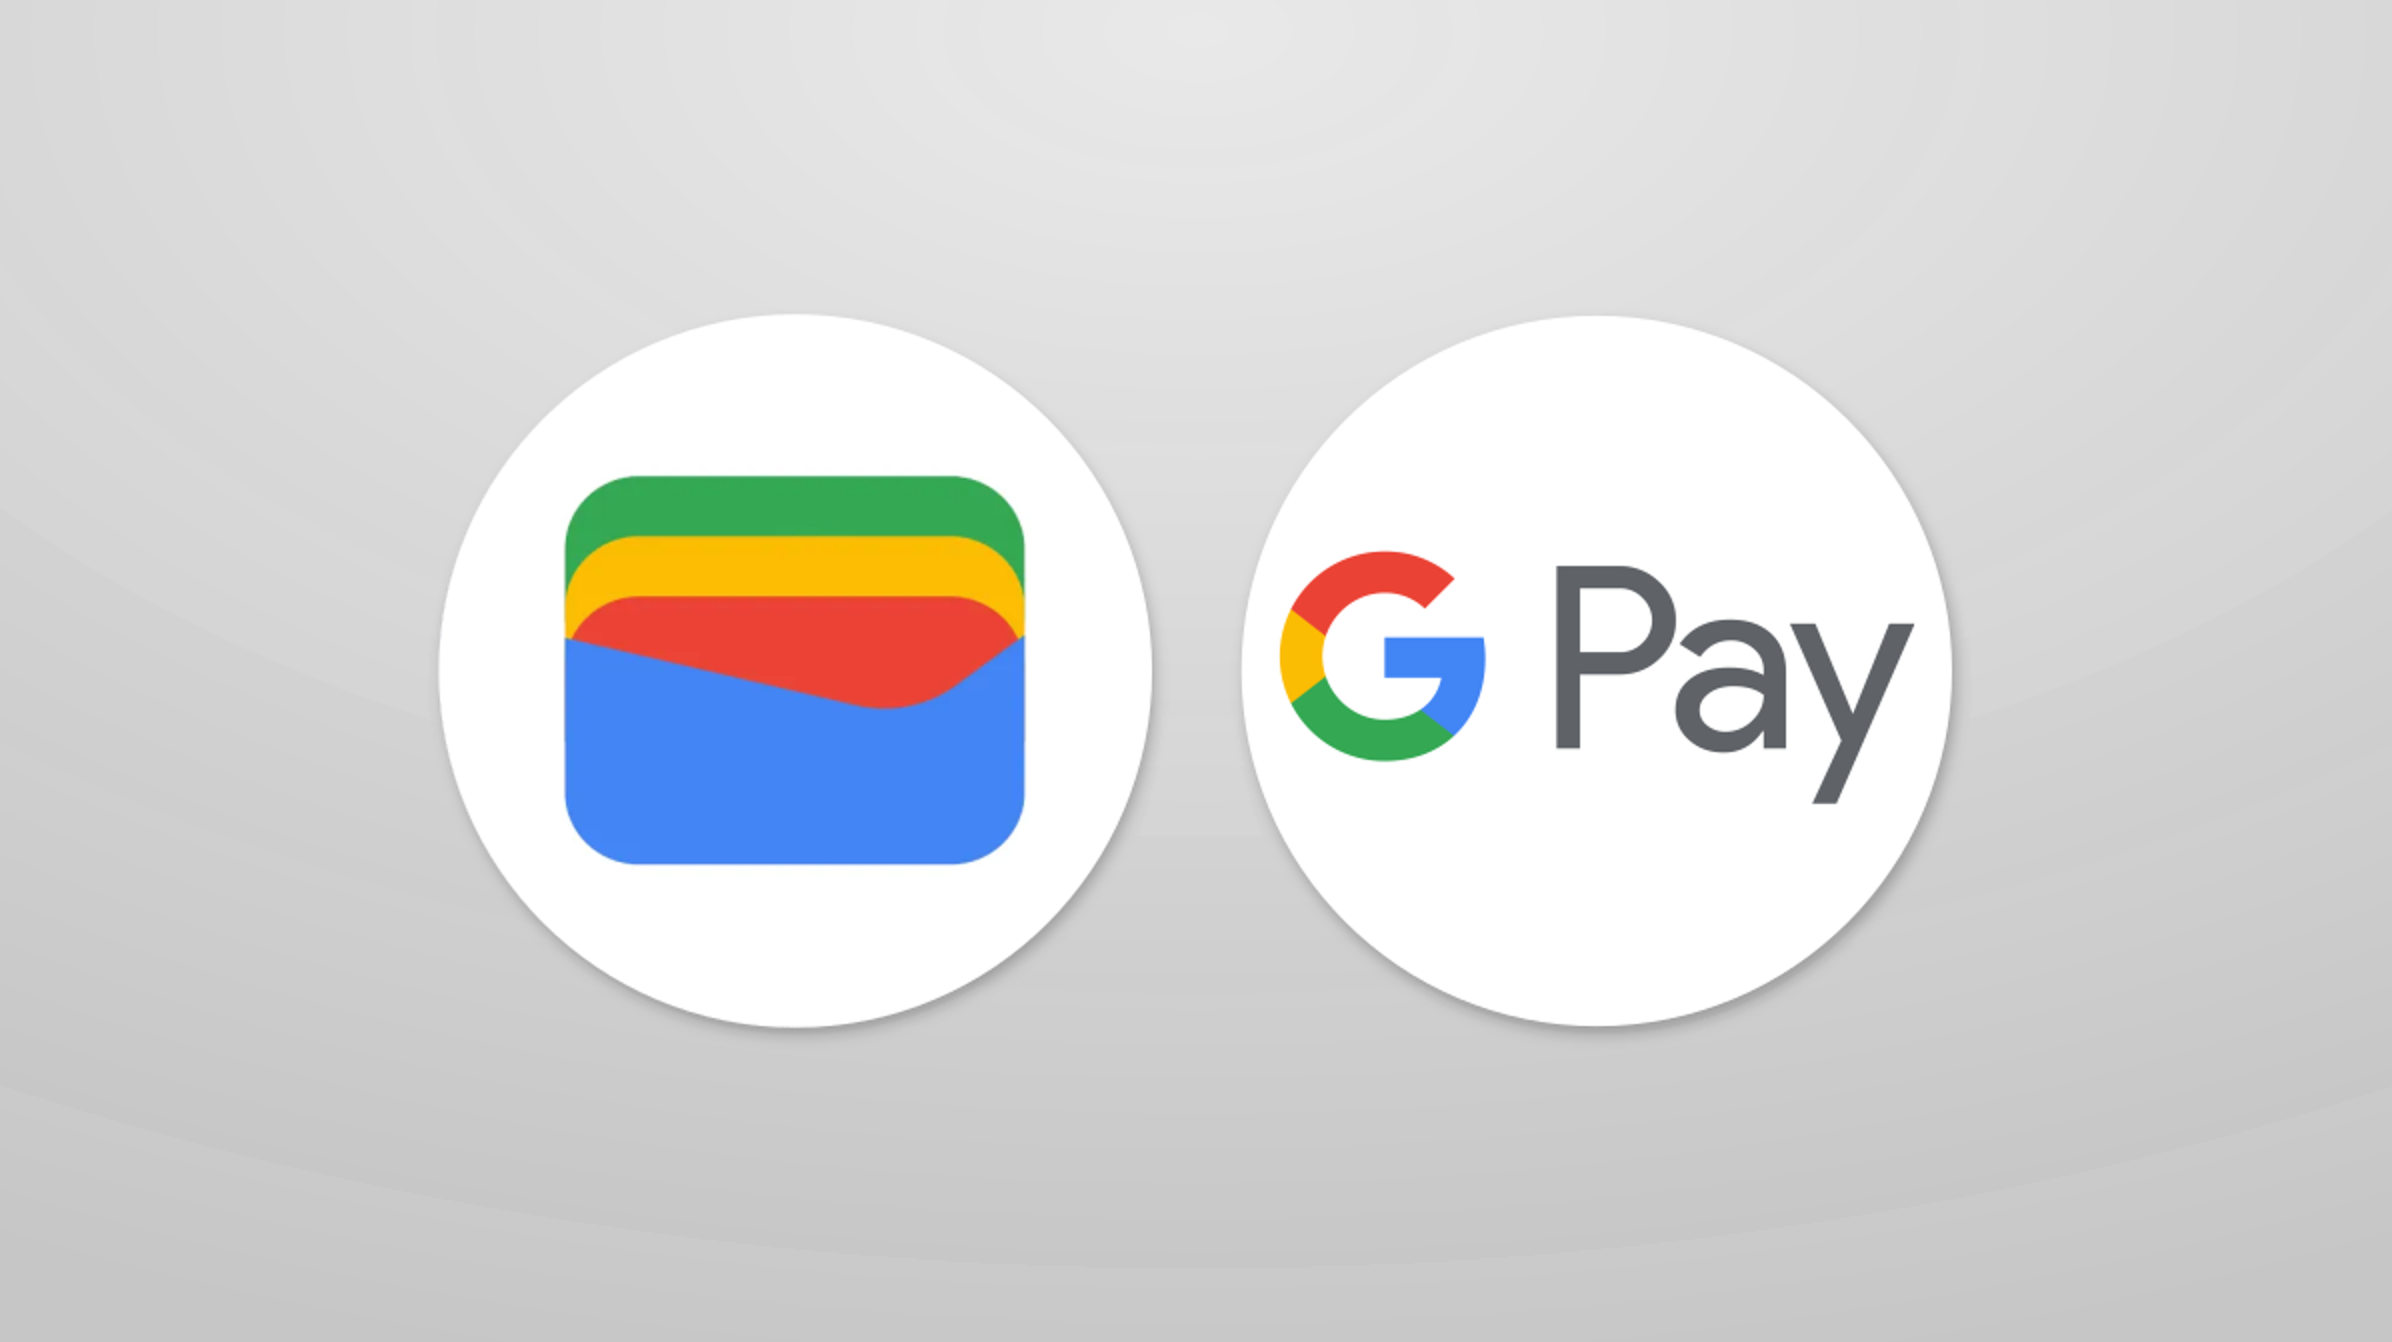 Google has accidentally given away up to $1000 to regular Google Pay users that don't need to be paid back